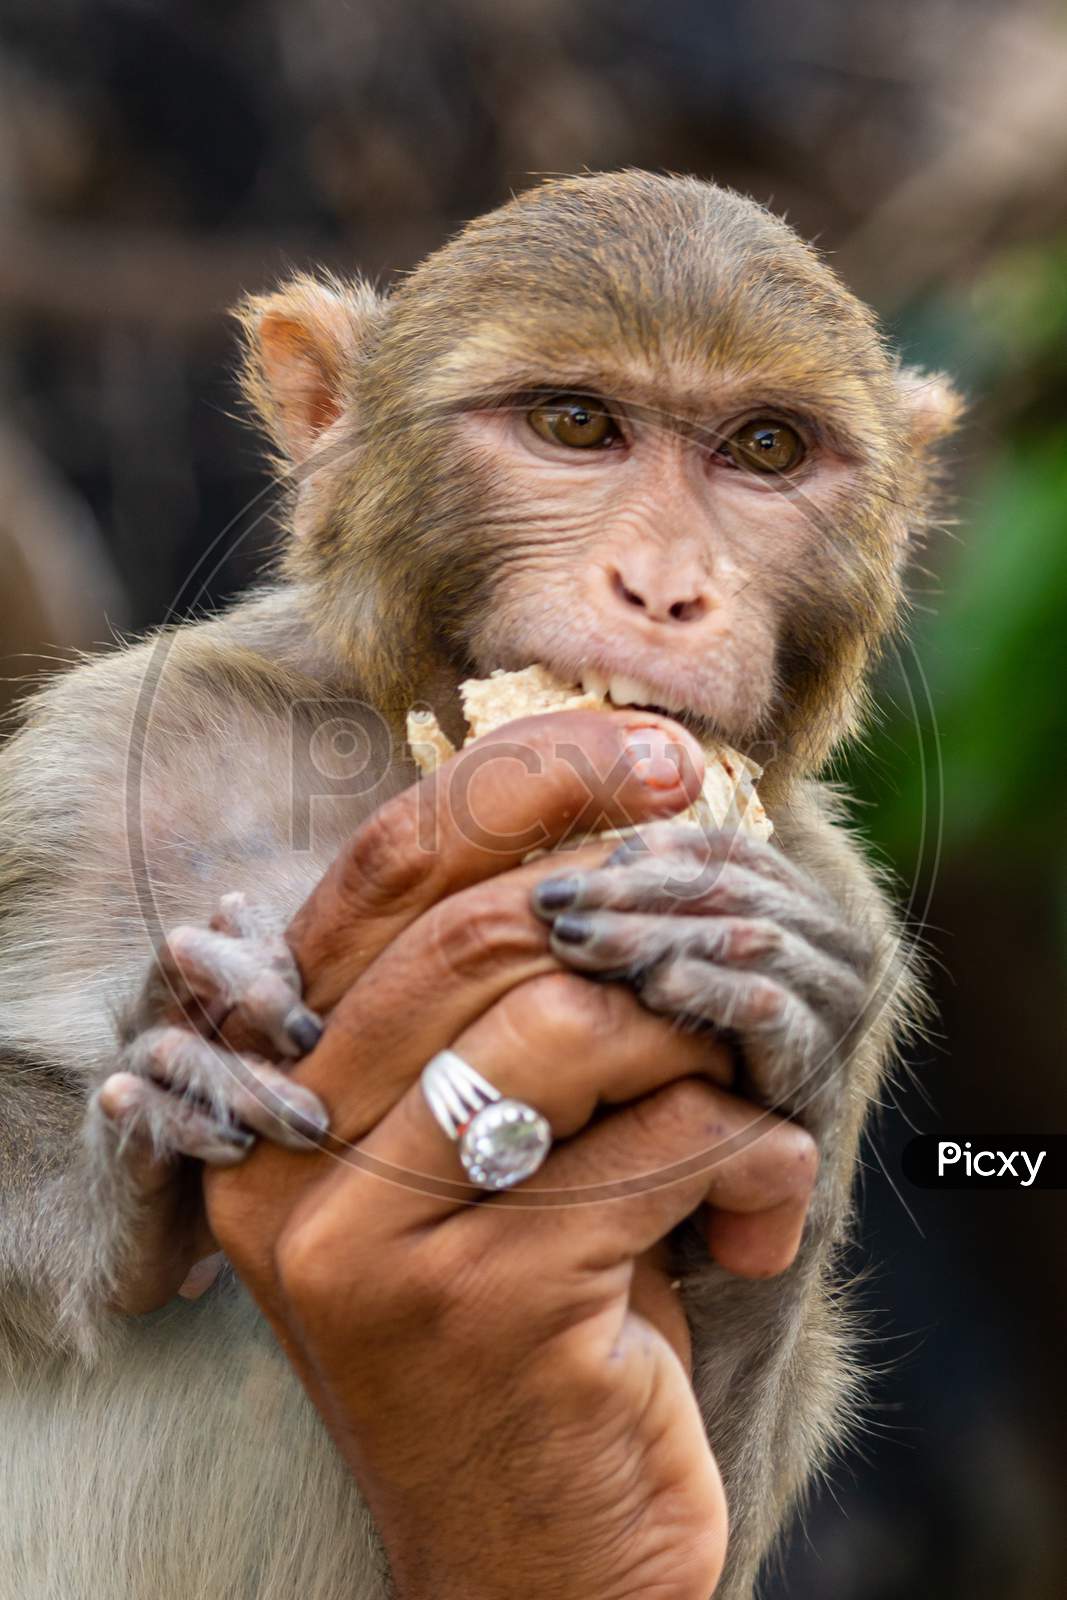 monkey eating from human hand